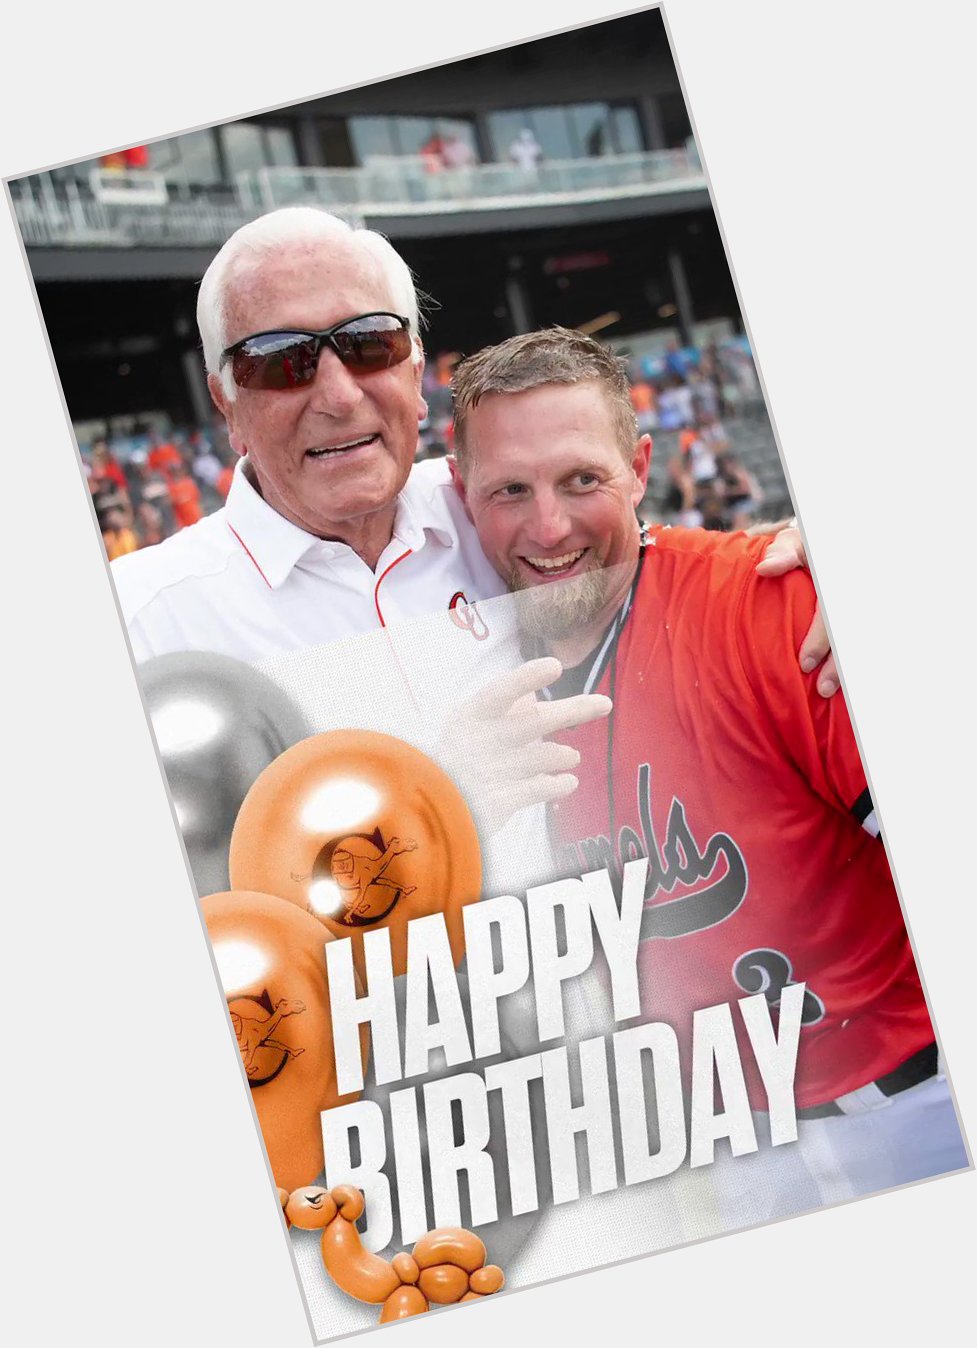 Happy Birthday to the Jim Perry! 
Thank you for all that you do for our program! 